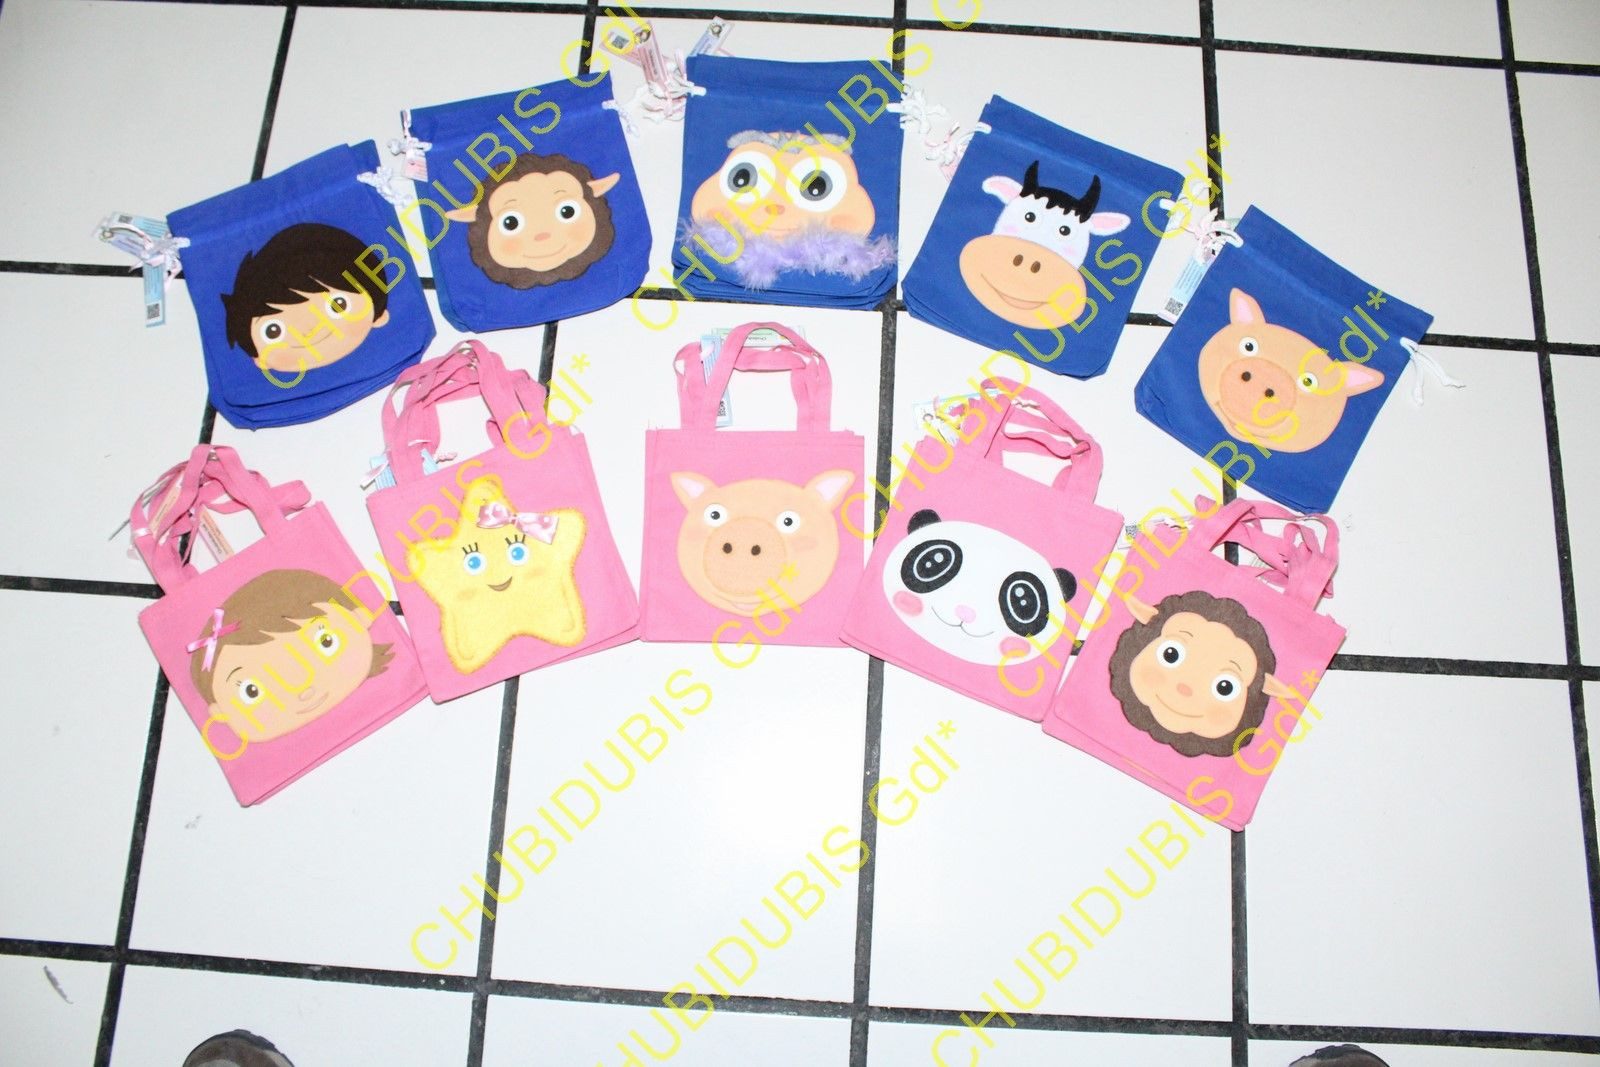 Little Baby Bum Party Theme
 Pin on Little Baby Bum Birthday Party